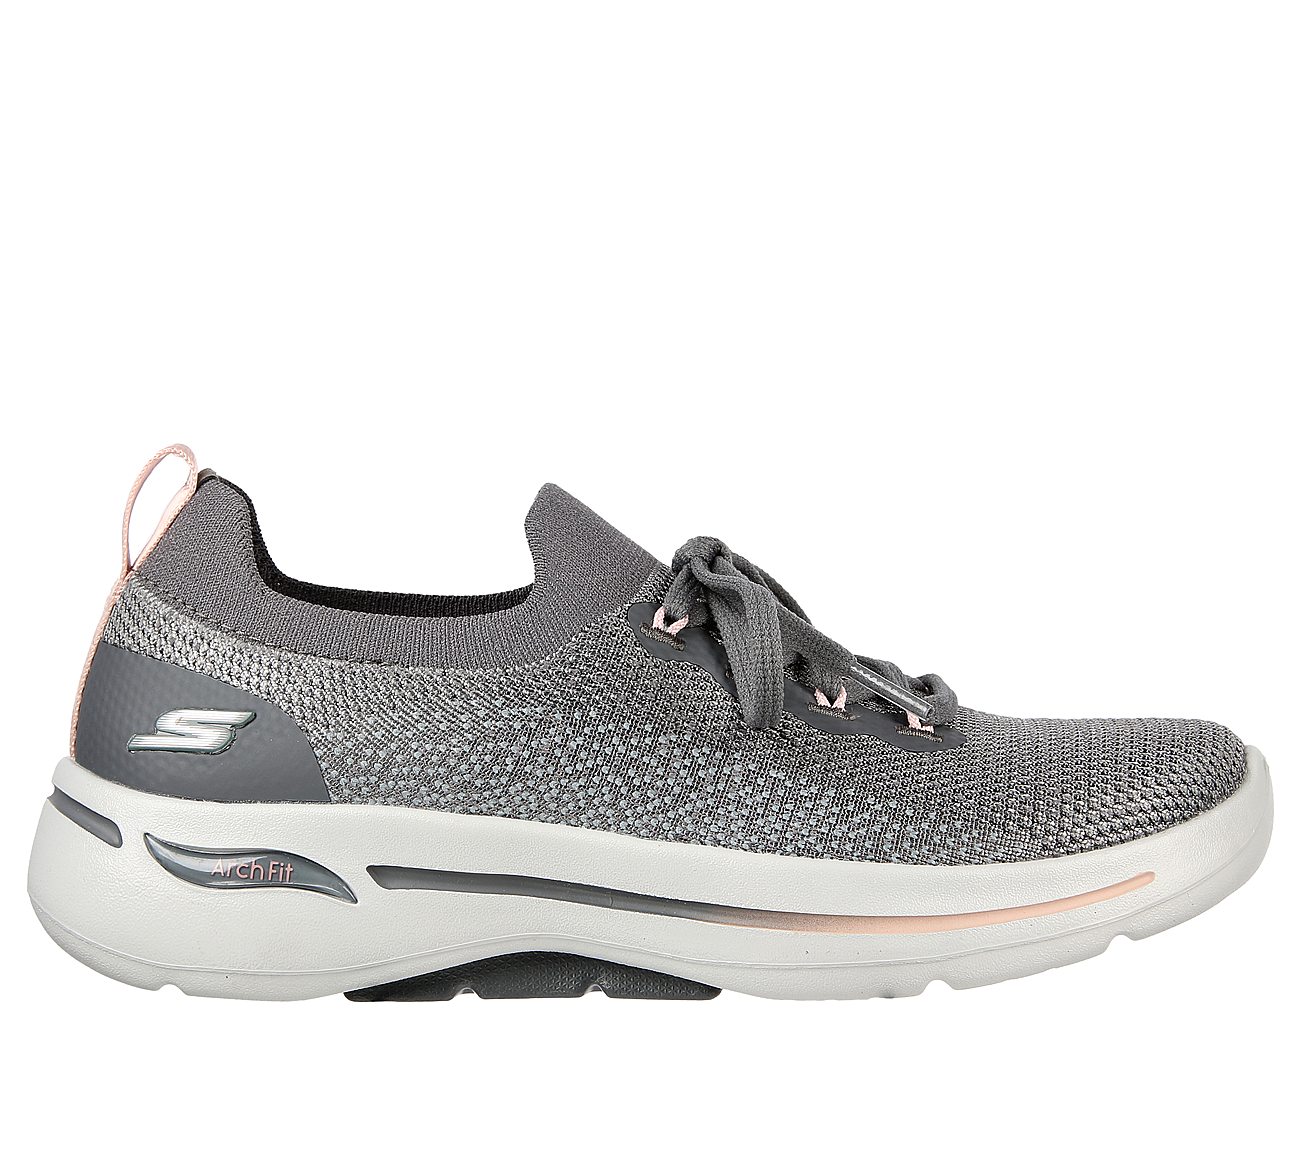 GO WALK ARCH FIT - CLANCY, GREY/PINK Footwear Lateral View